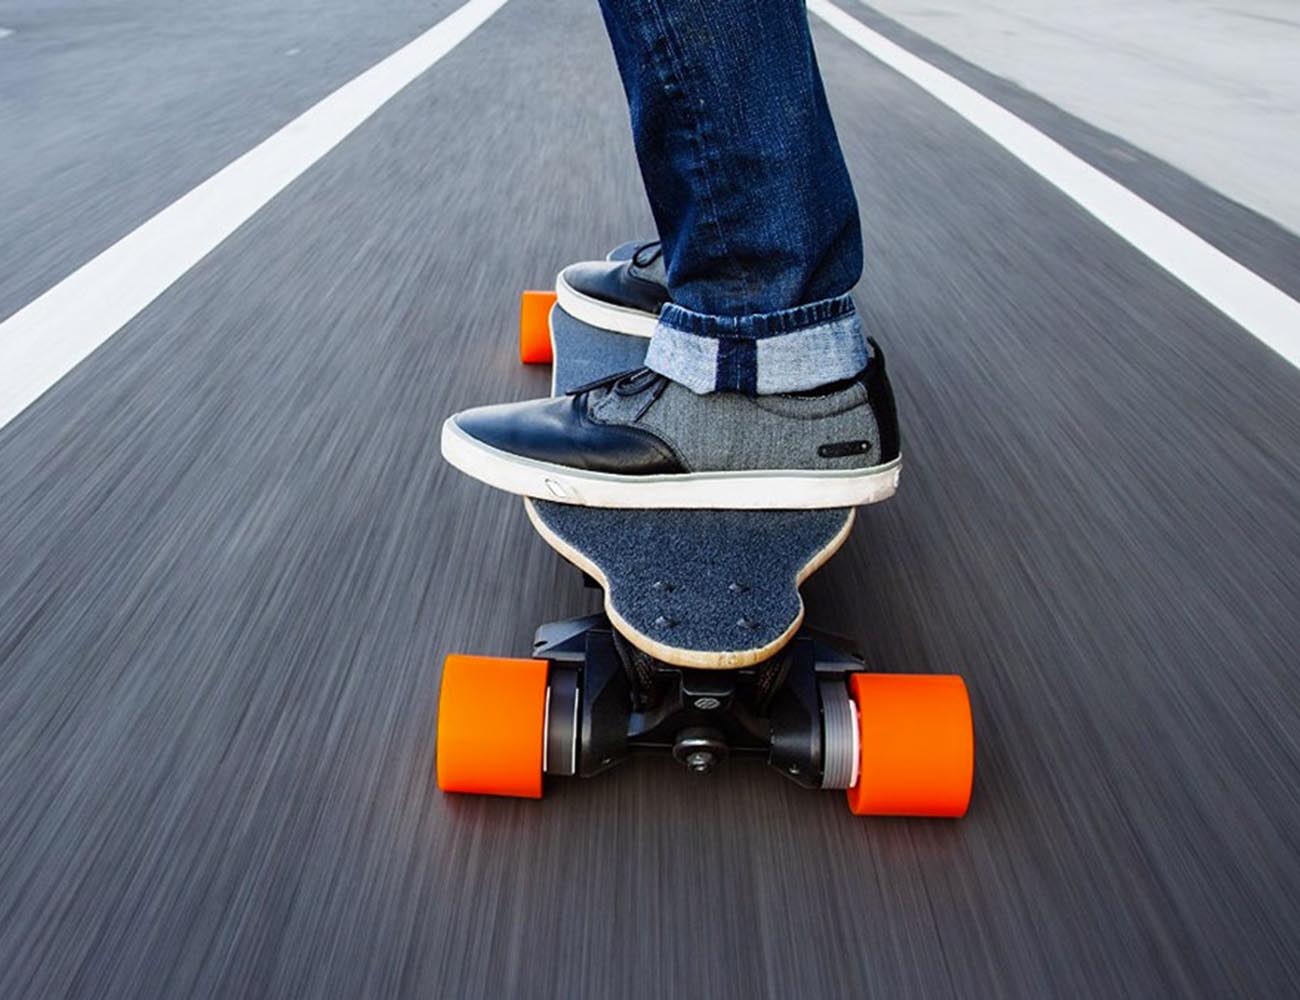 Boosted Dual+ 2000W Electric Skateboard - Advanced Electric Vehicle Technology